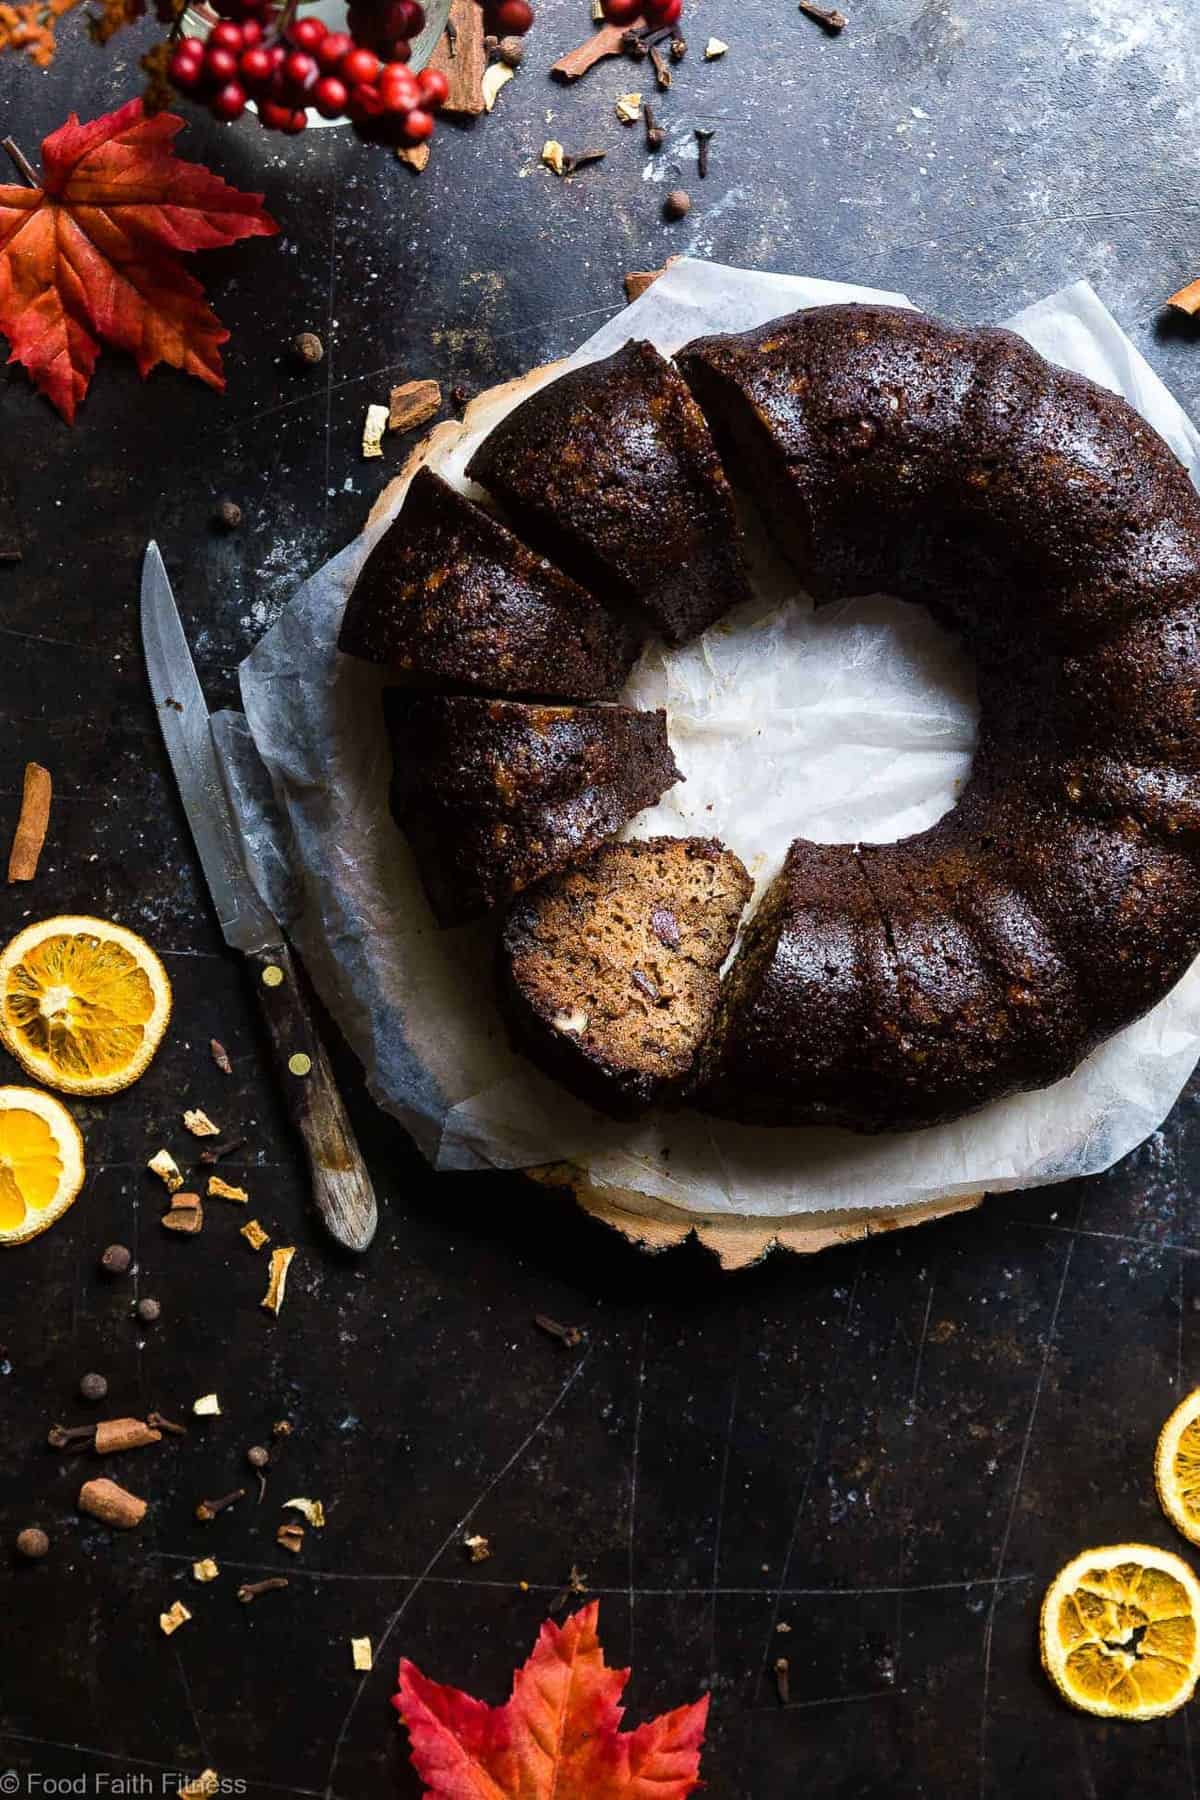 Gluten Free Mulled Wine cake - This better for you red wine cake has all the spicy, cozy flavors of the classic holiday drink! It's gluten/grain/dairy free and BOOZY! What more could you want? | #Foodfaithfitness | #Glutenfree #Grainfree #Dairyfree #Mulledwine #Cake